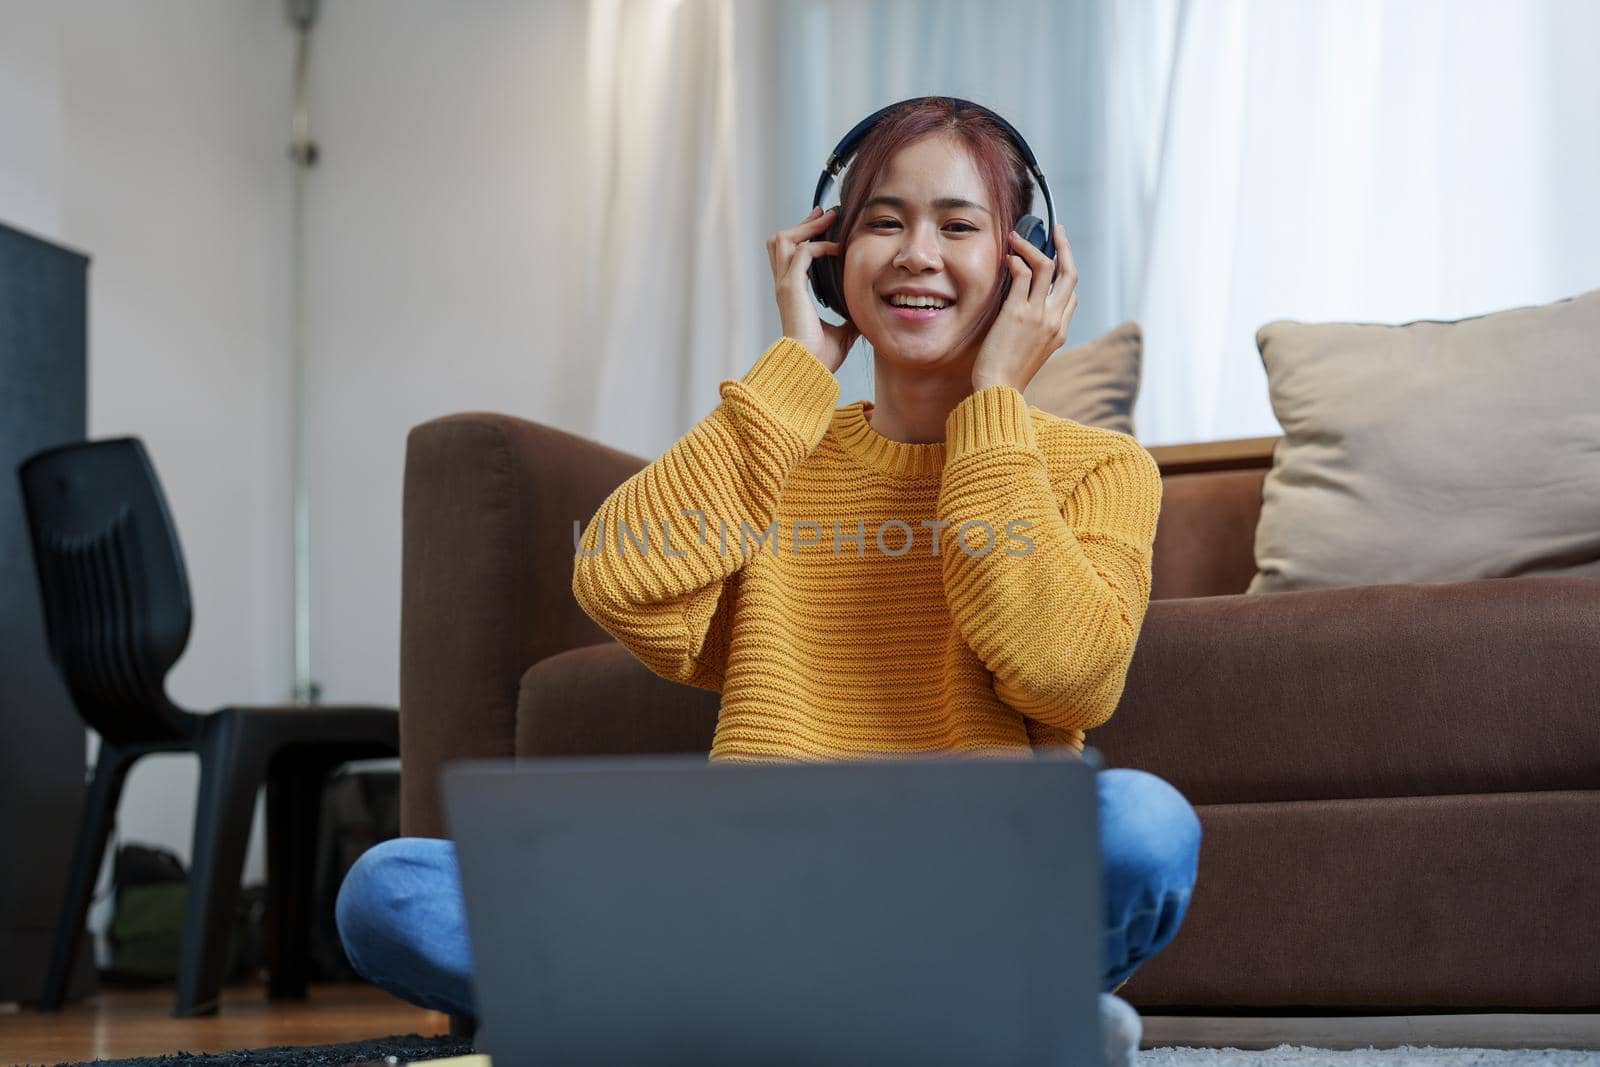 A portrait of a young Asian woman with a smiling face wearing a pair of headphones and using computer and listening to music while sitting on the sofa.